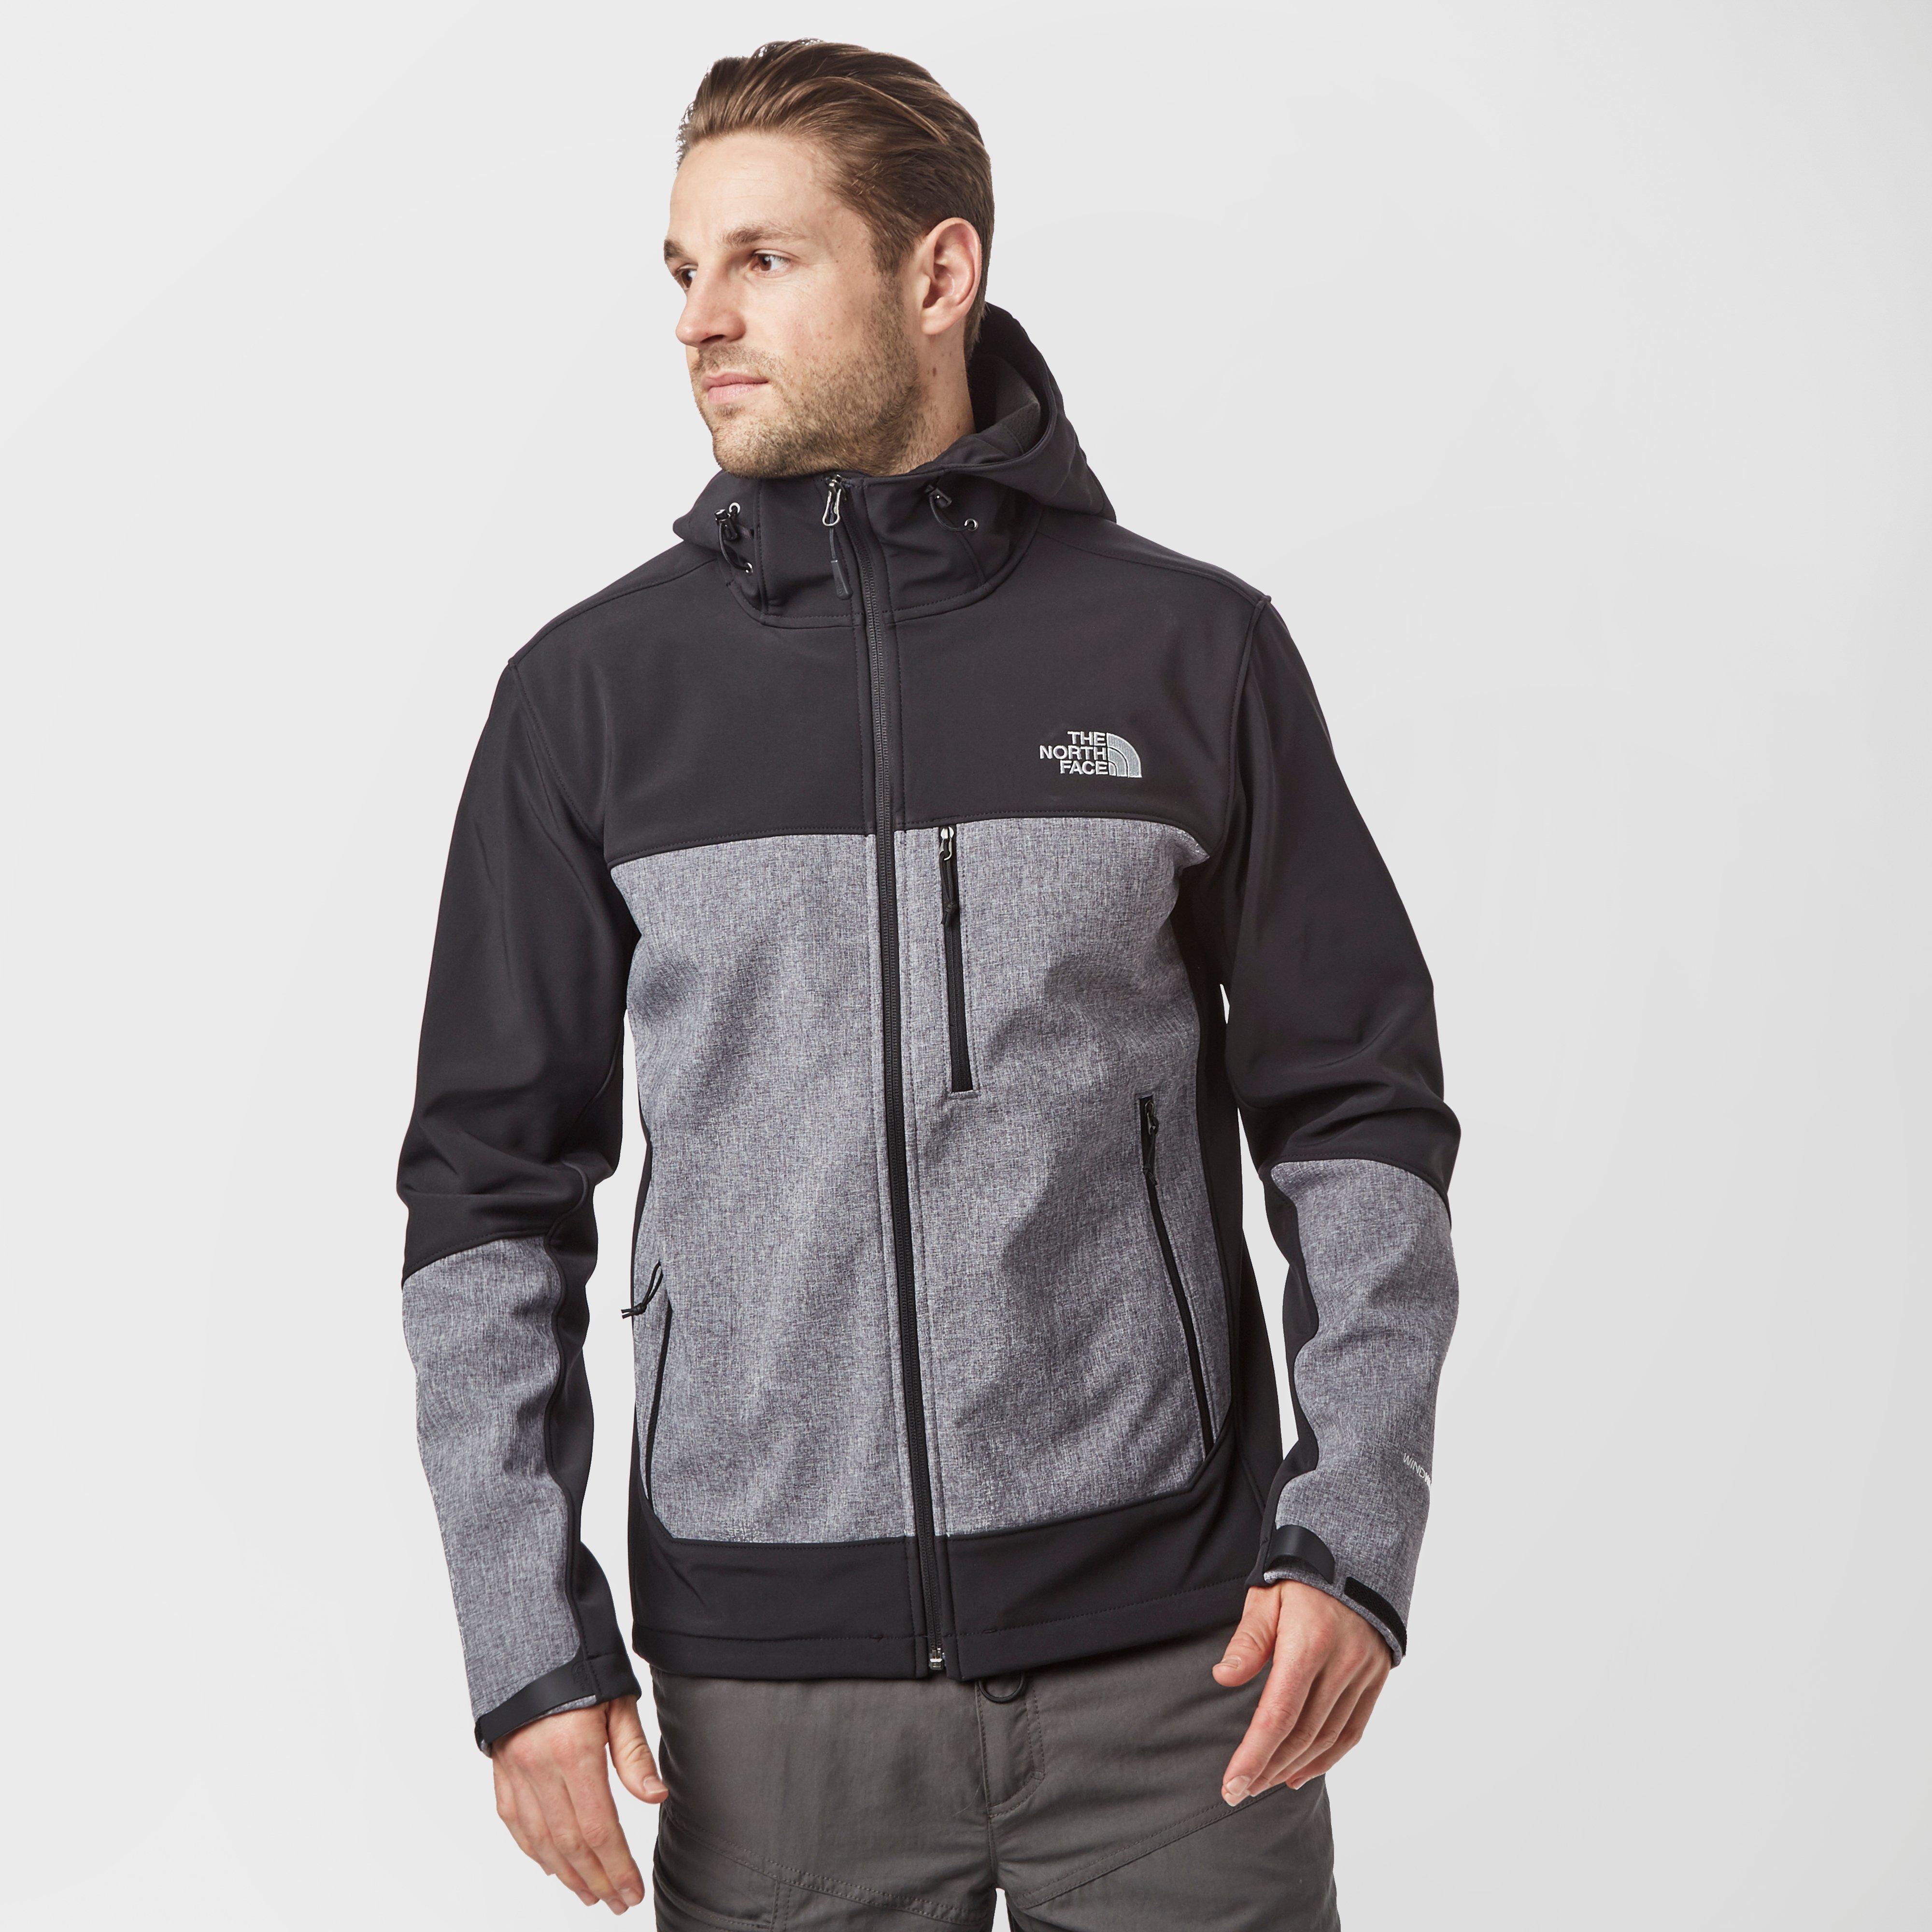 north face apex bionic jacket womens sale